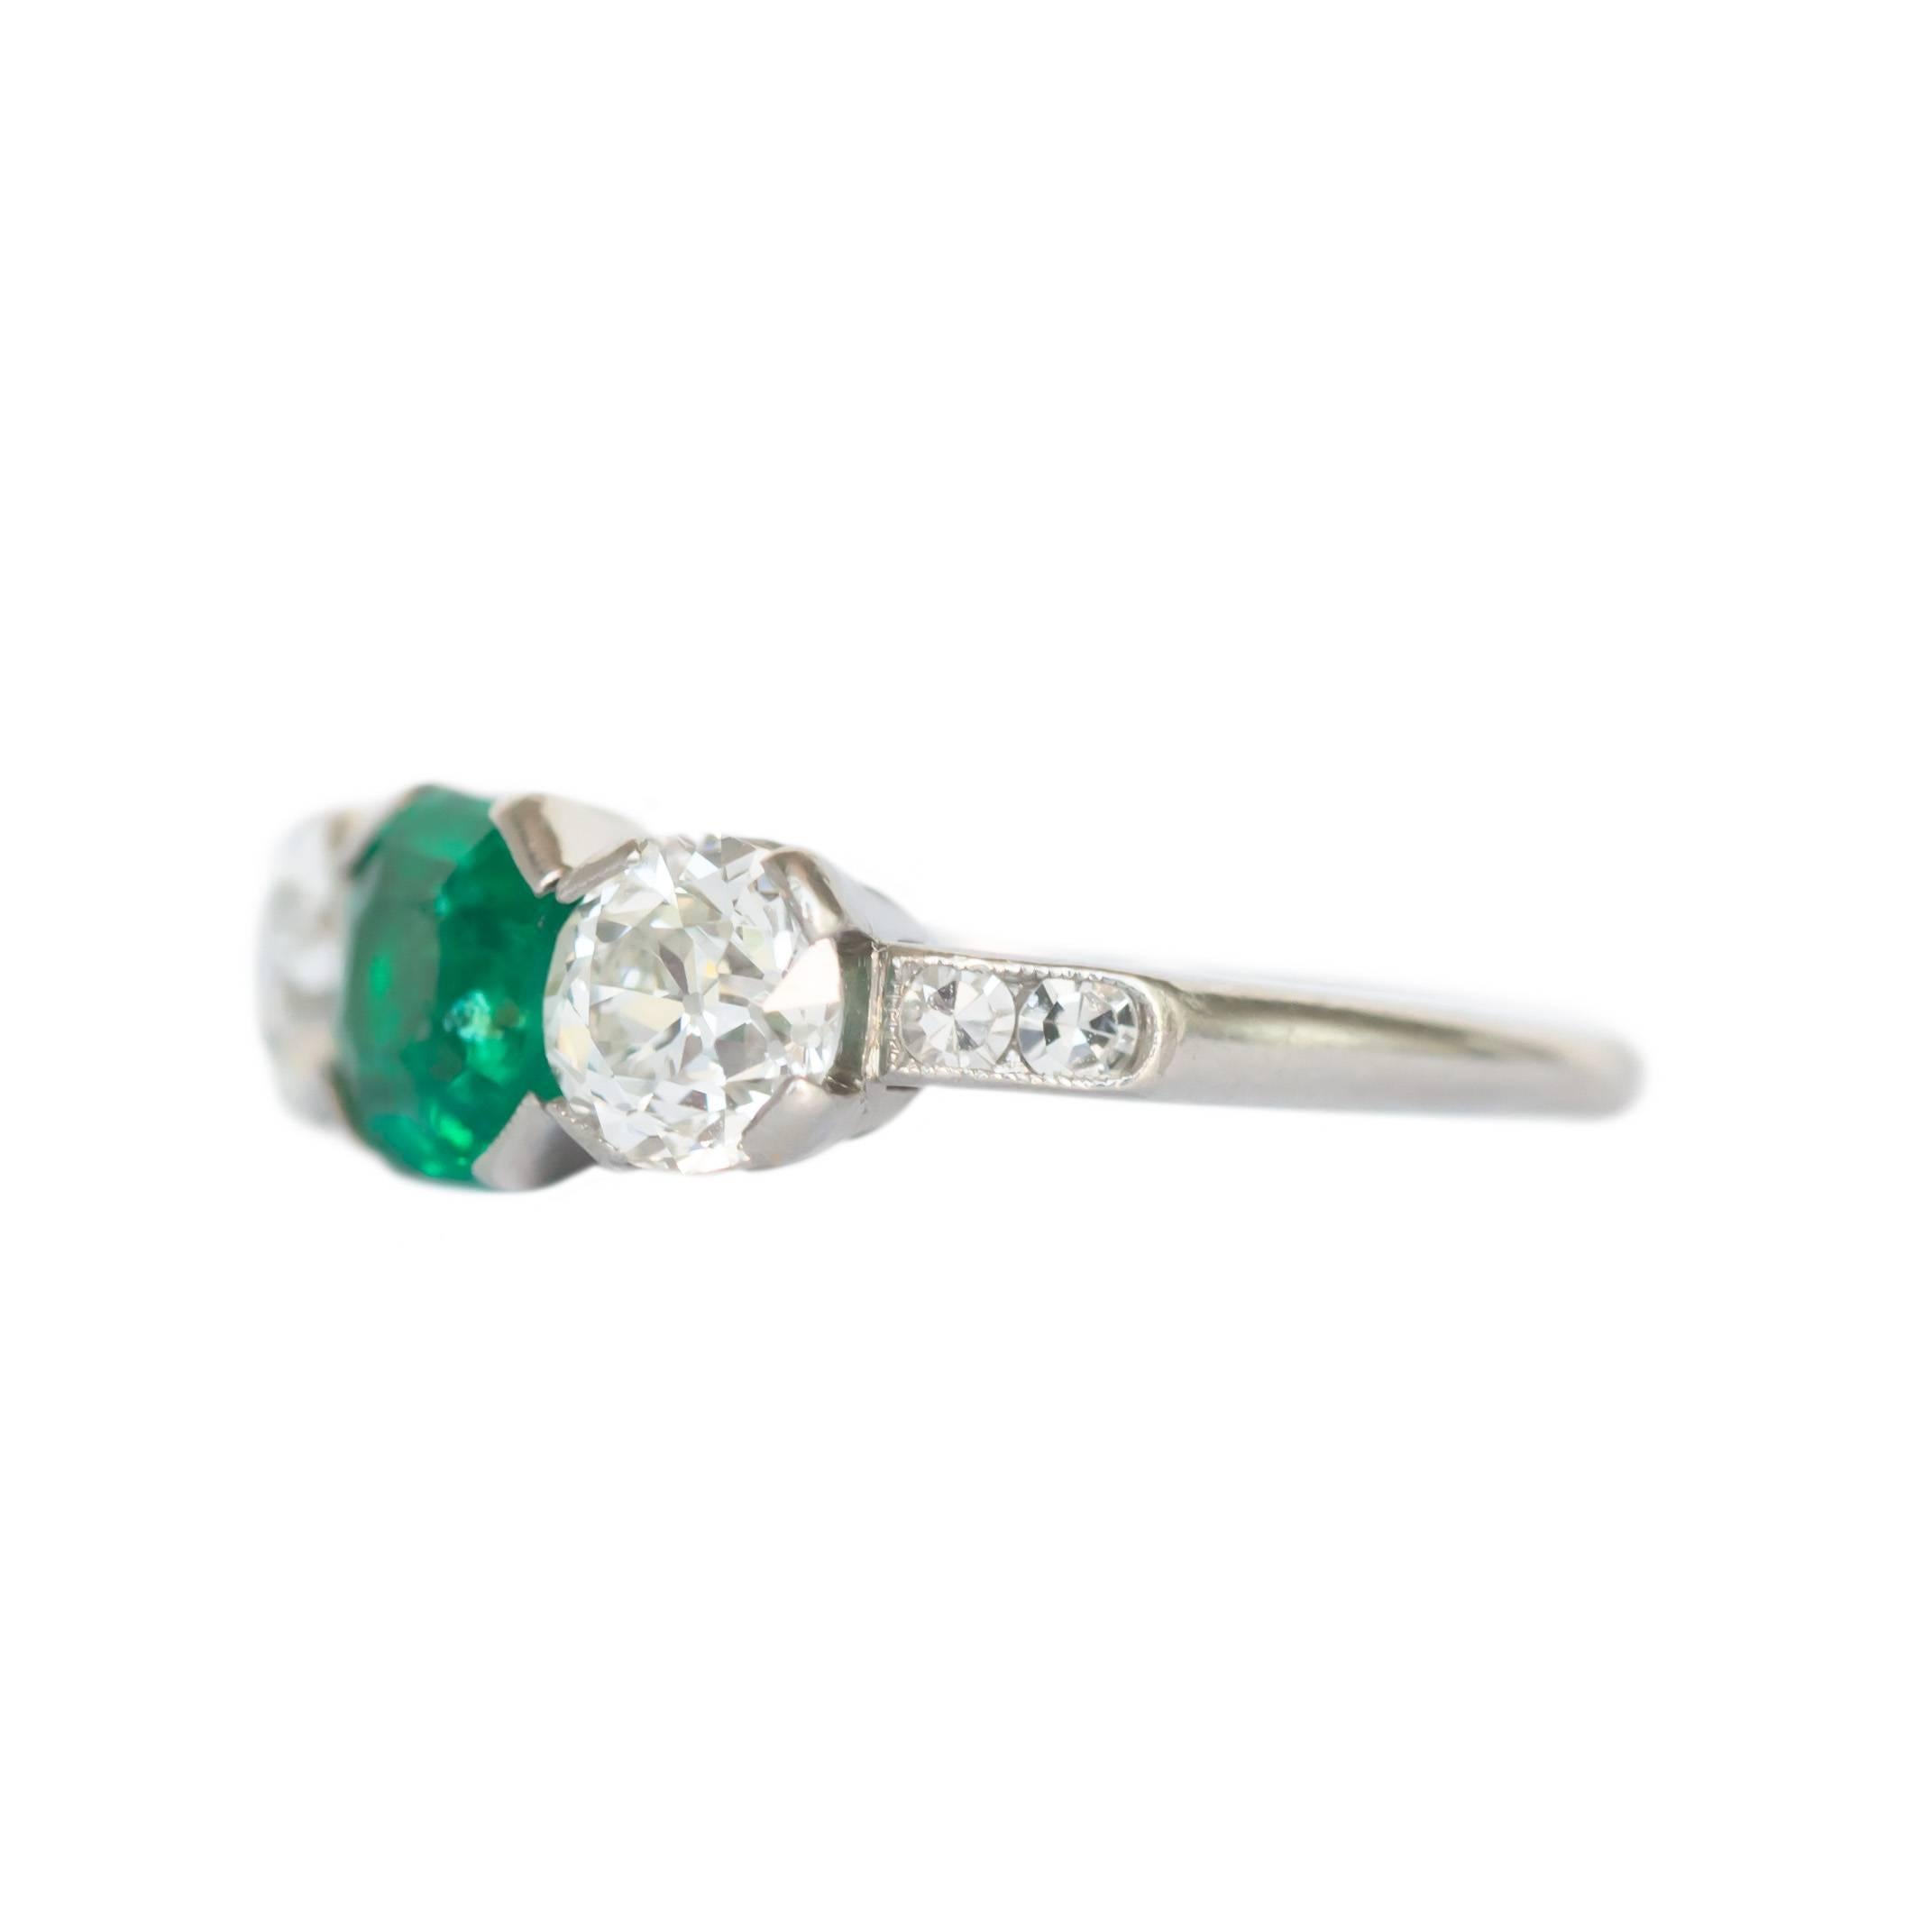 Item Details: 
Ring Size: 5.25
Metal Type: Platinum
Weight: 3.6 grams

Center Color Stone Details: 
Type: Natural Colombian Emerald, No oil treatment
Shape: Octagon
Carat Weight: 1.00 carat, total weight.
Color: Natural Emerald 

Two Side Diamond